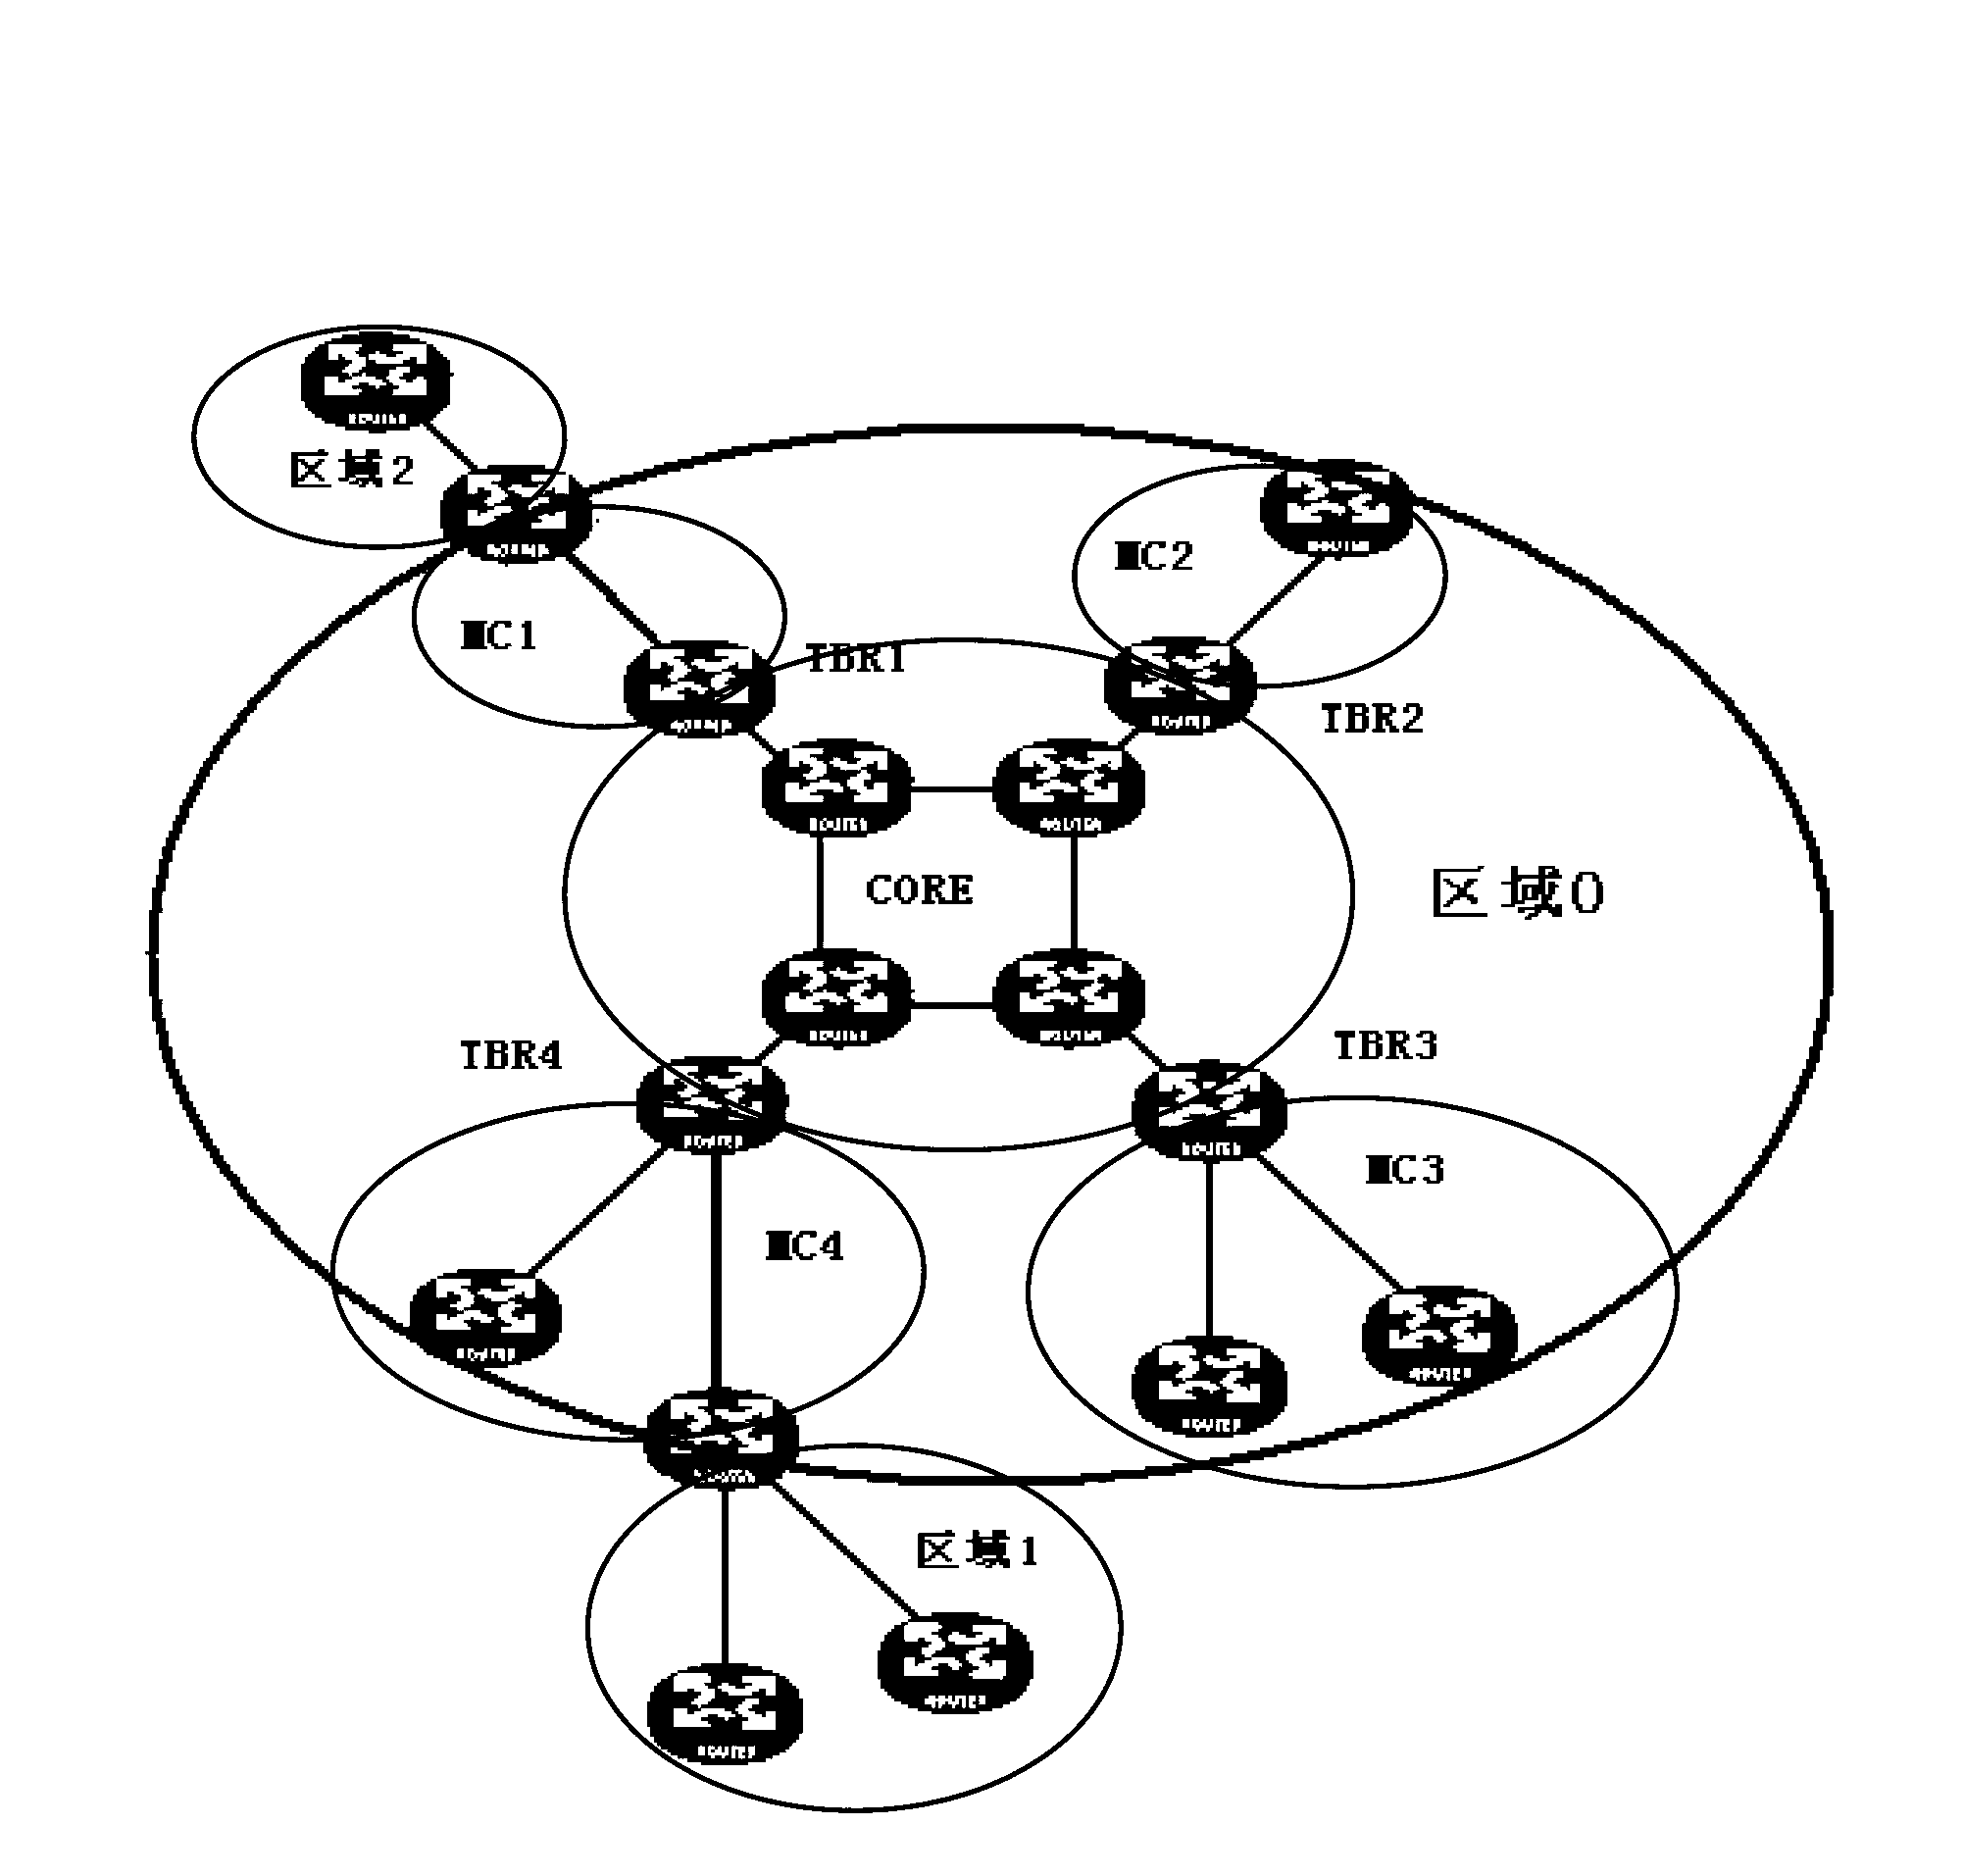 Router in OSPF (open shortest path first) network and processing method thereof